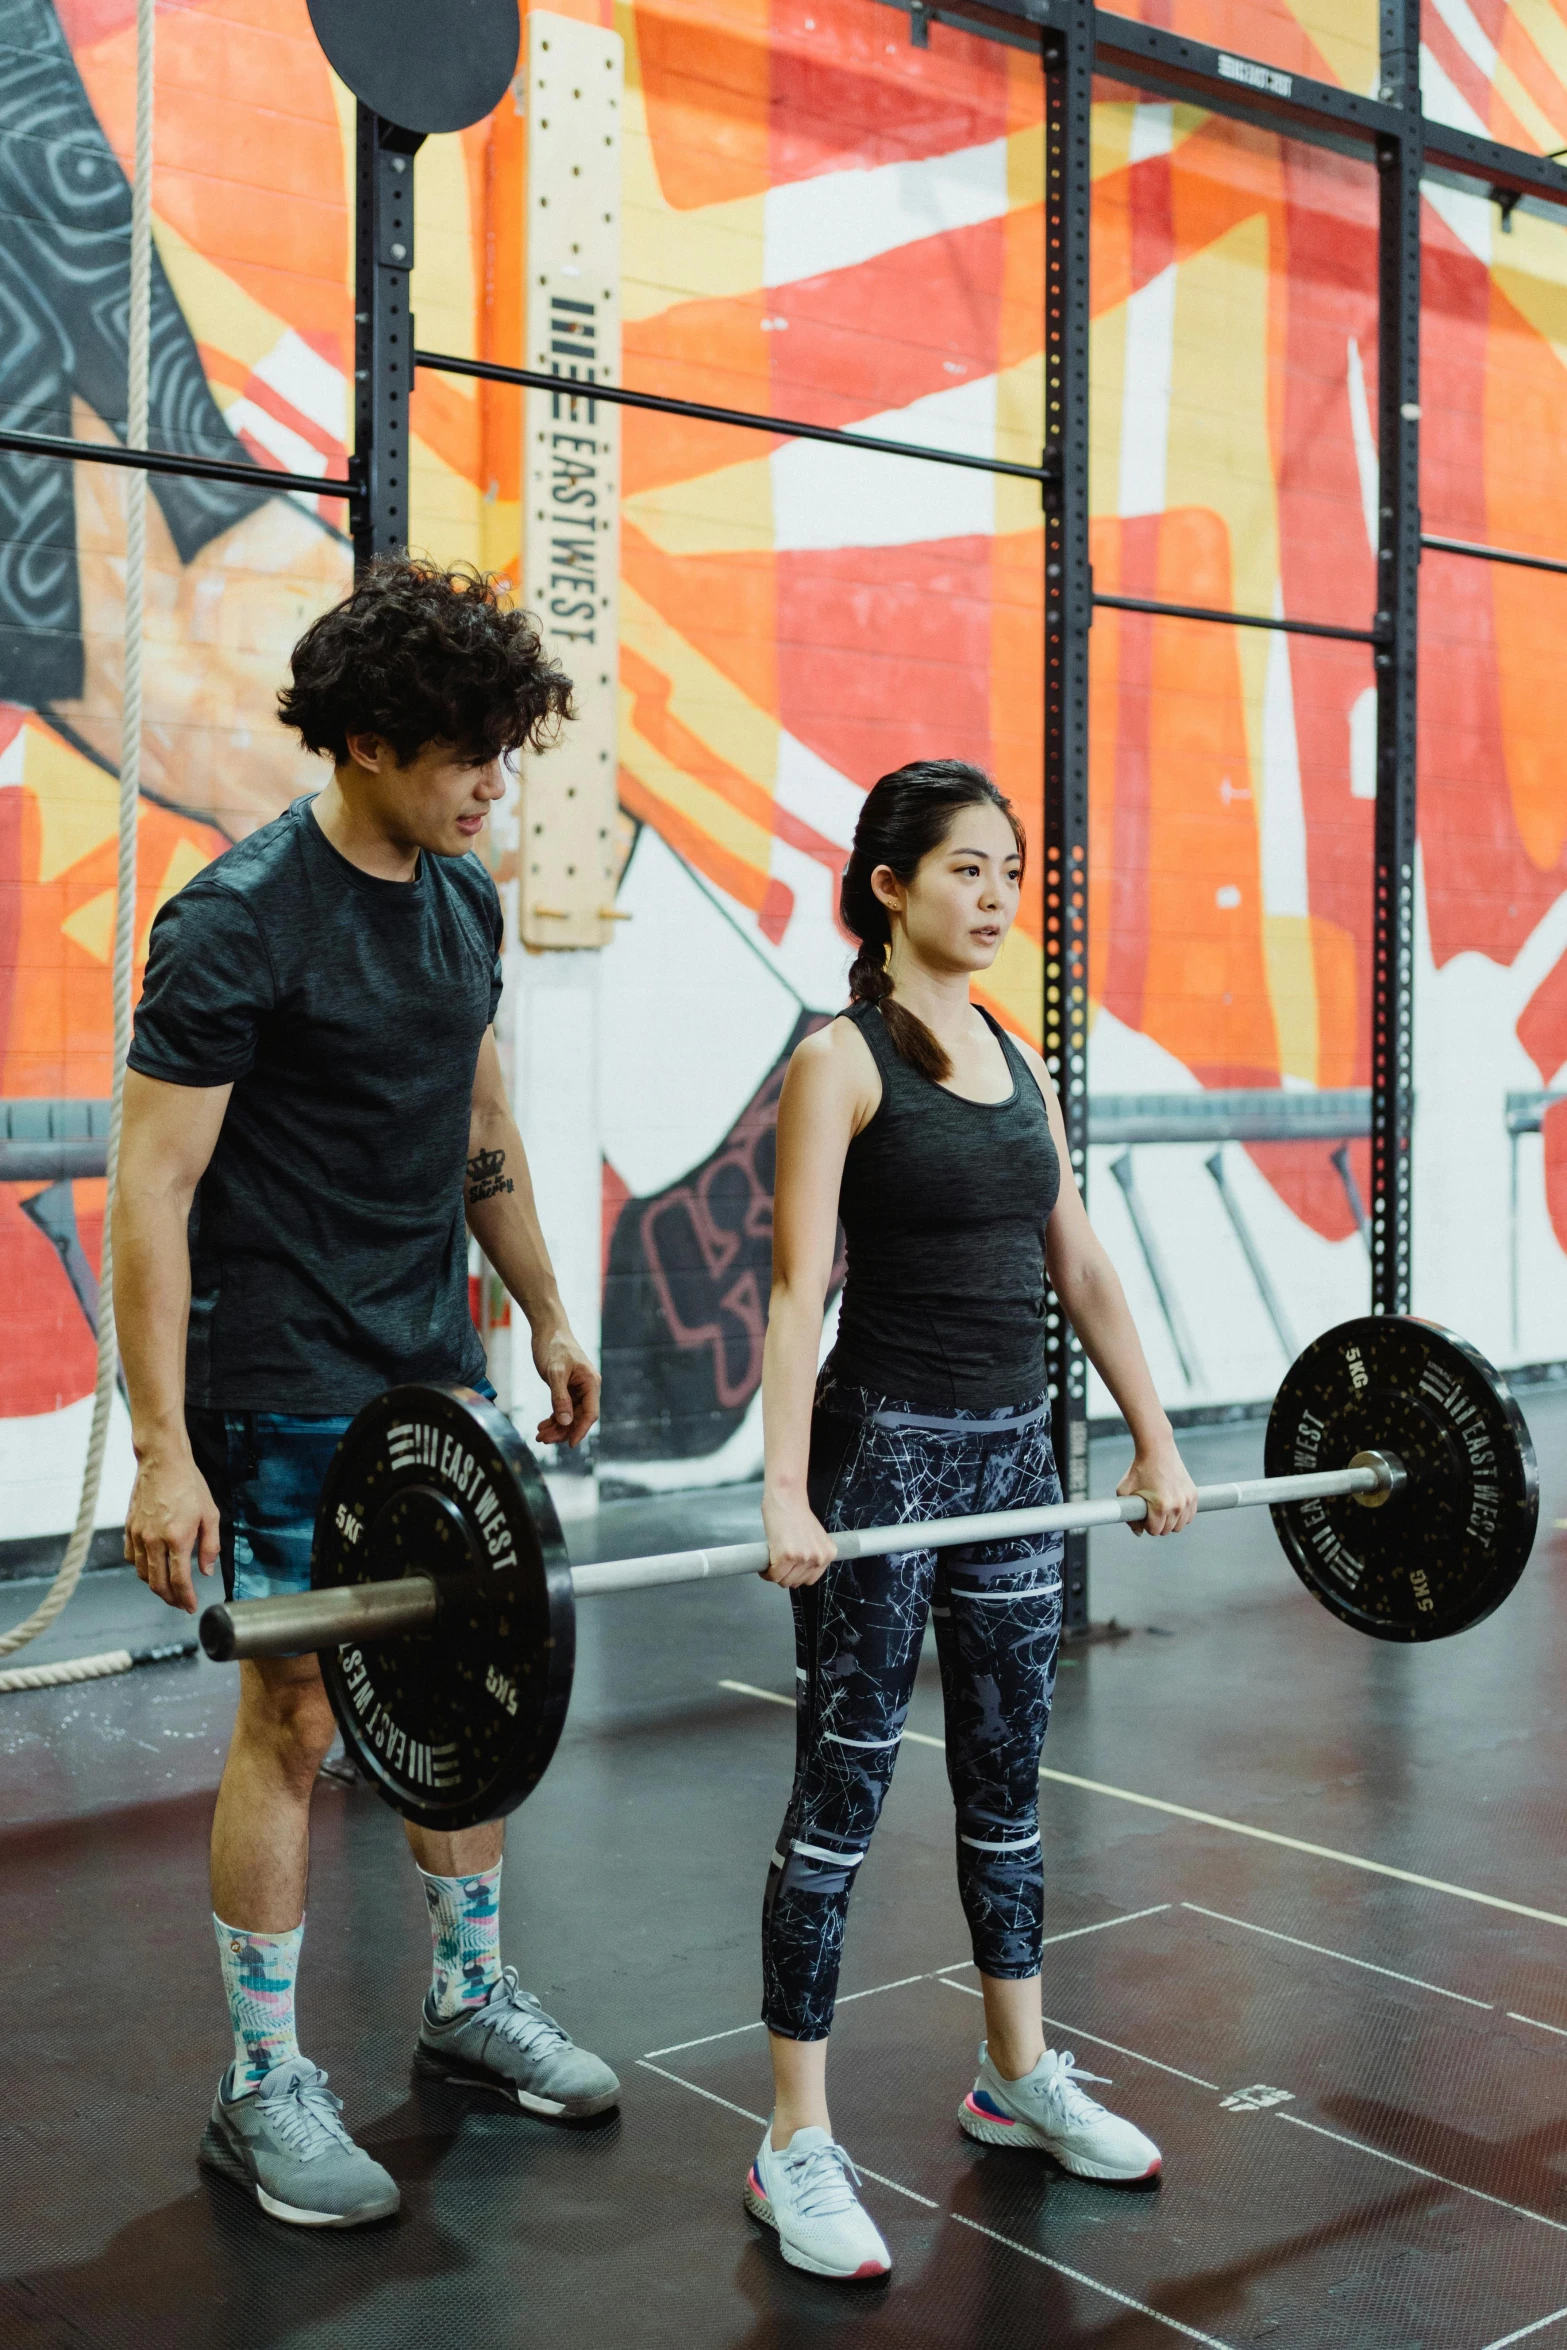 man and woman lifting a barbell at a gym